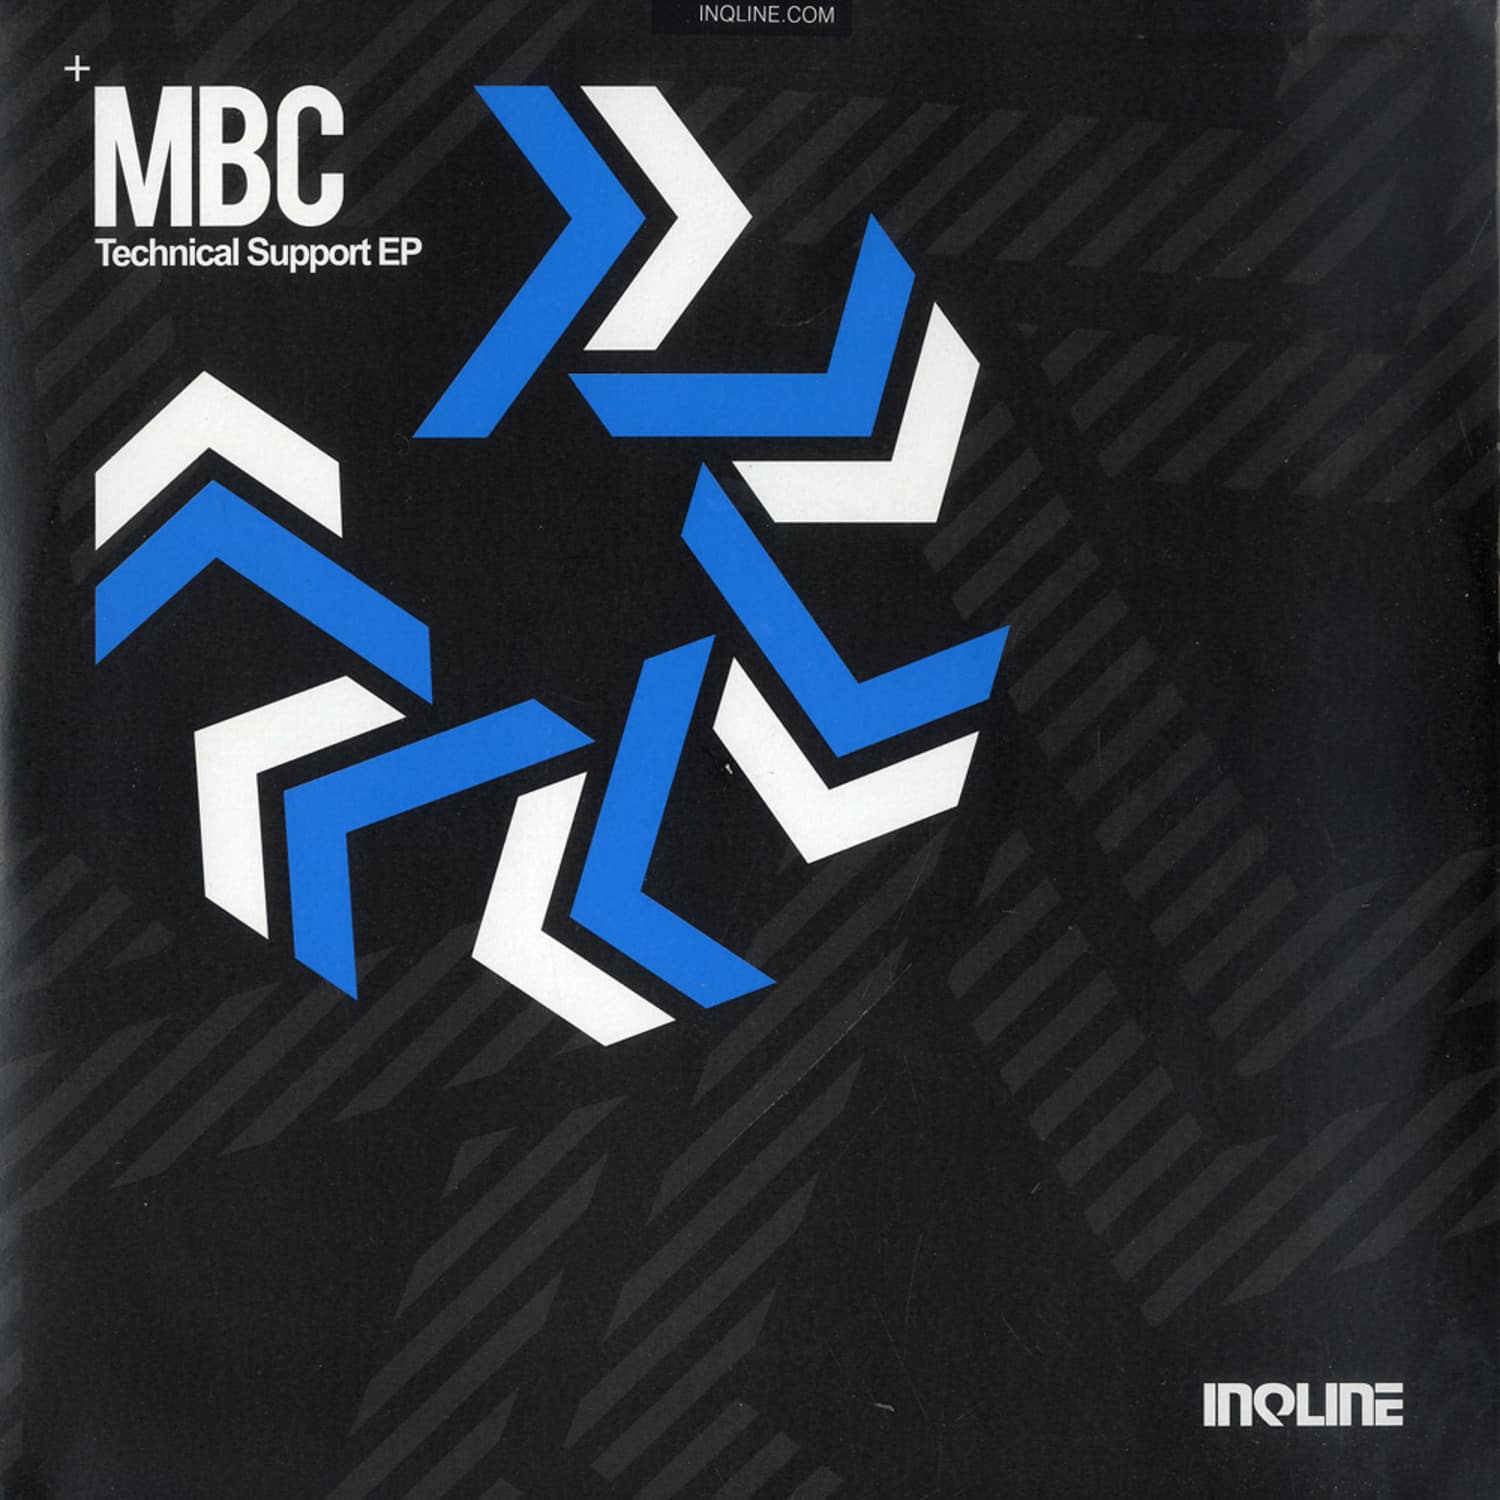 MBC - TECHNICAL SUPPORT EP